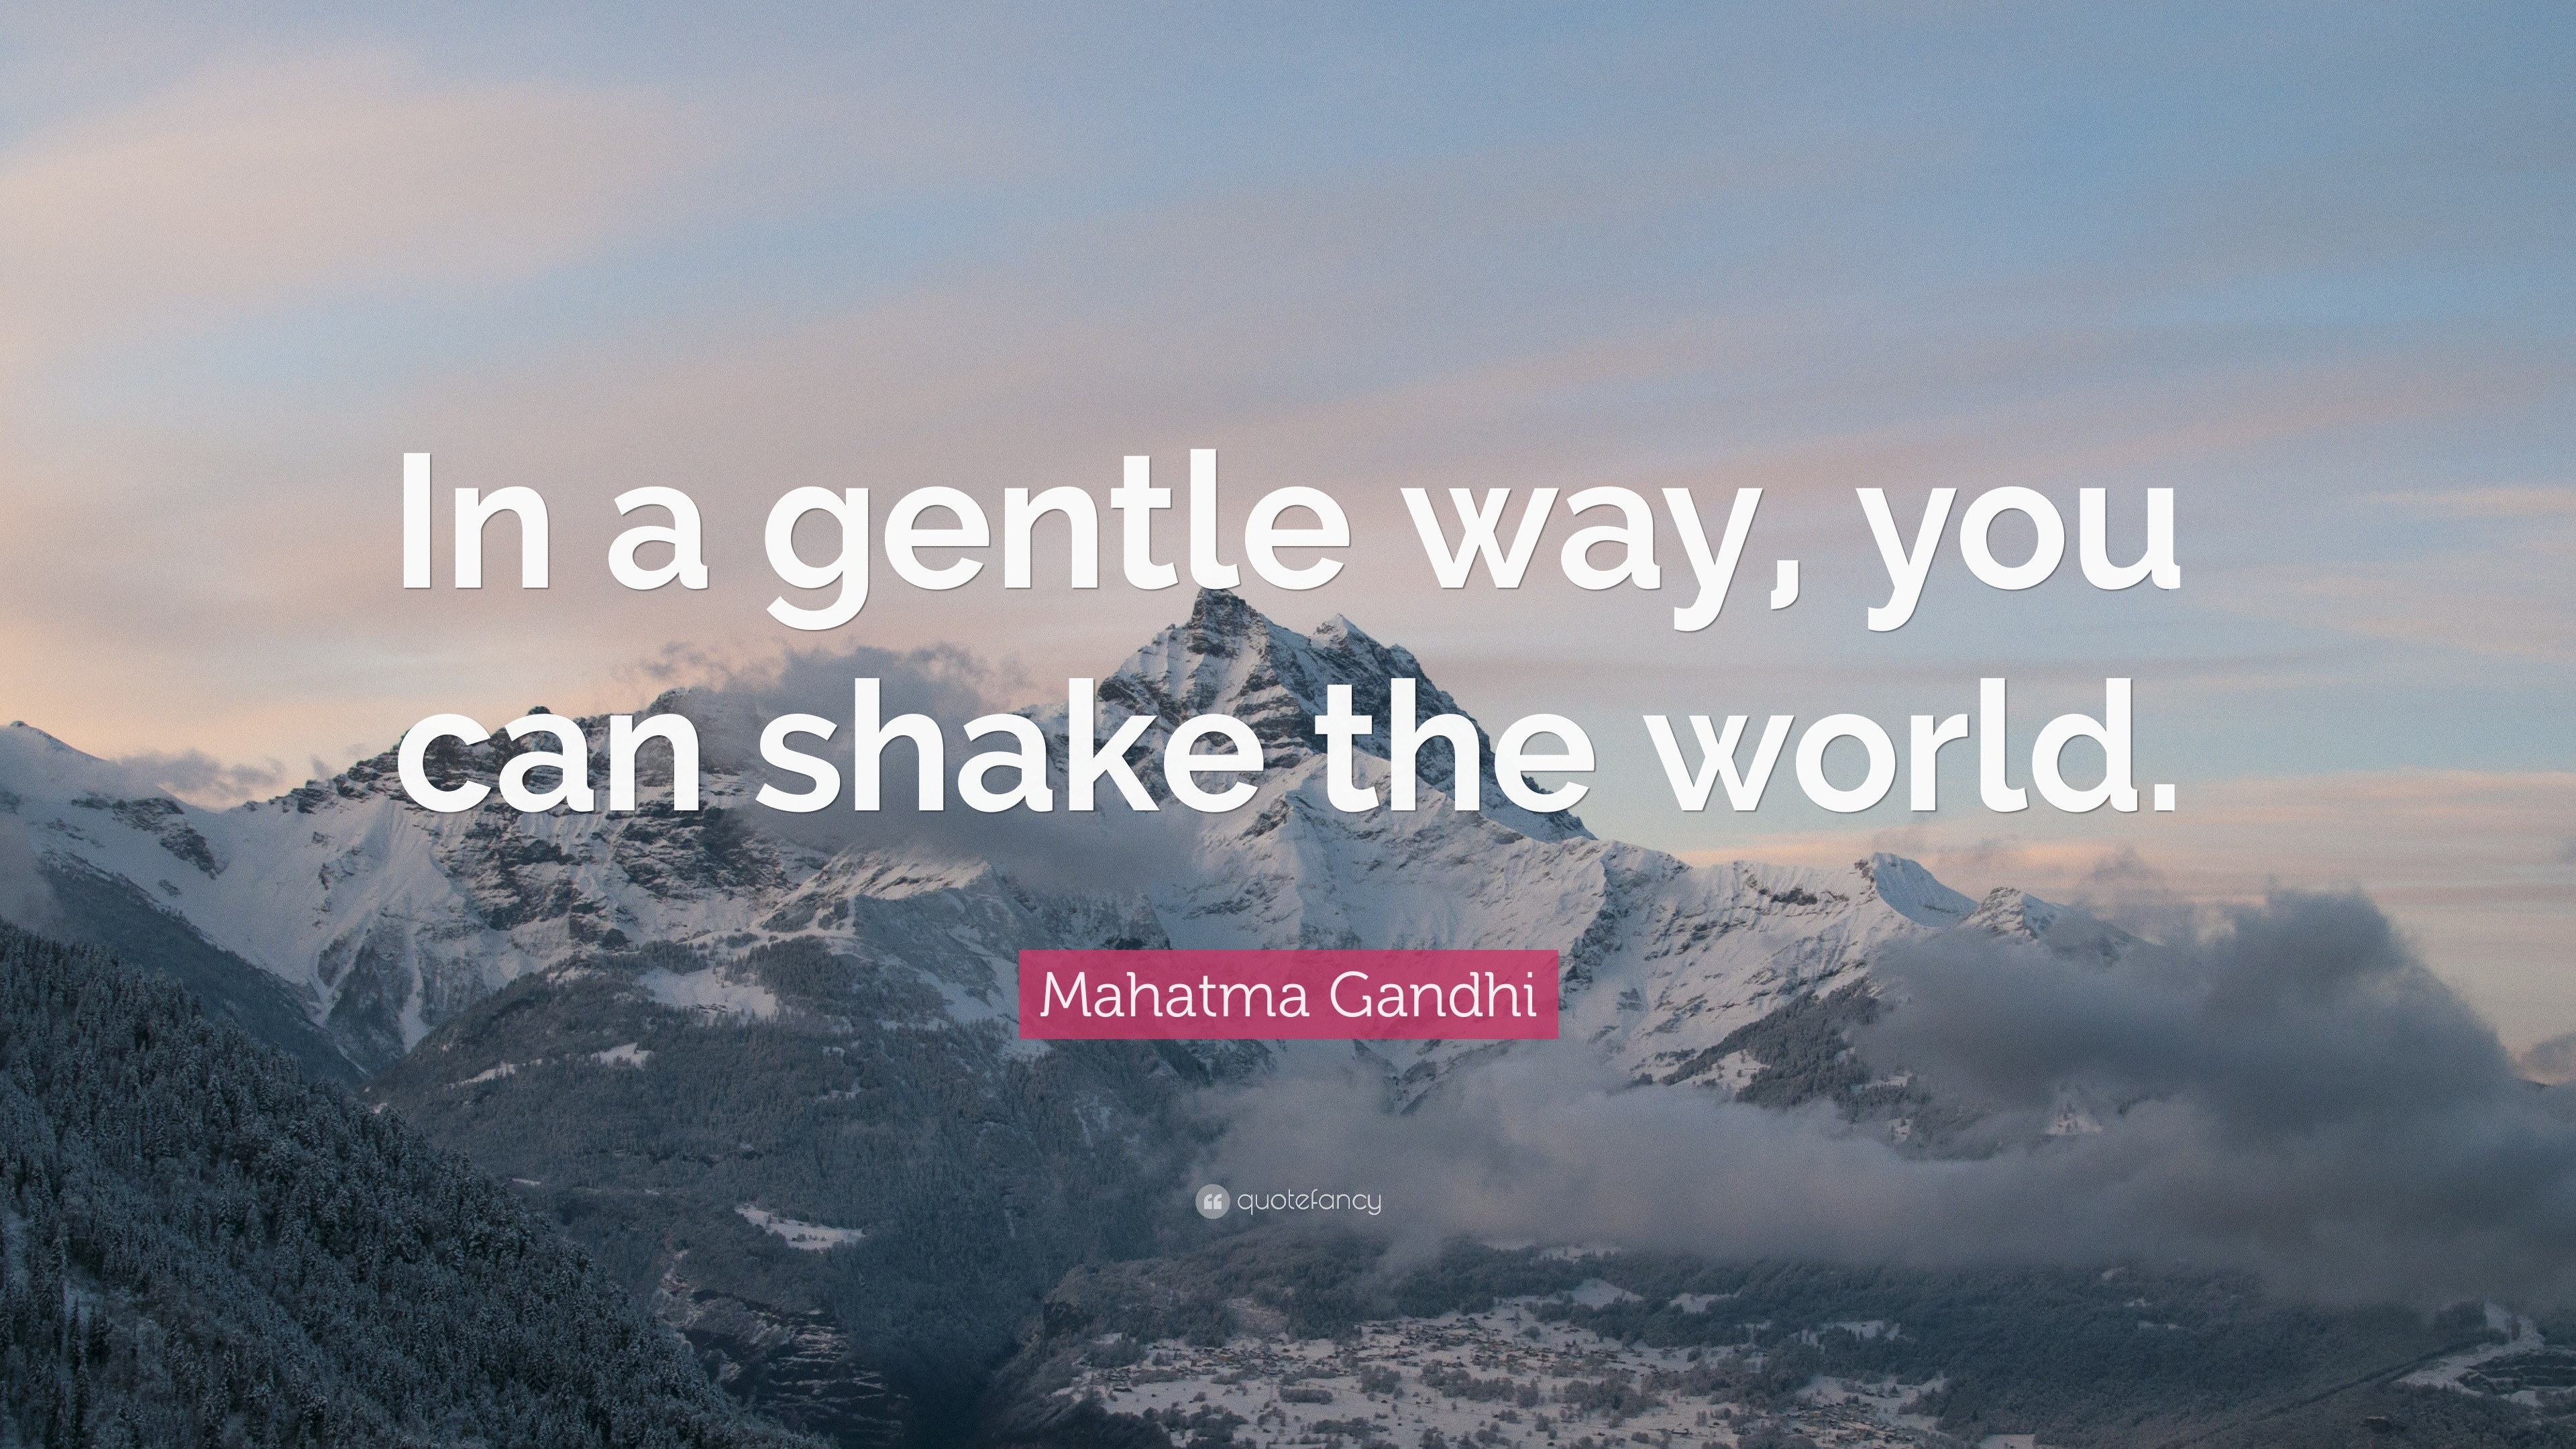 Mahatma Gandhi Quote: “In a gentle way, you can shake the world.” (25